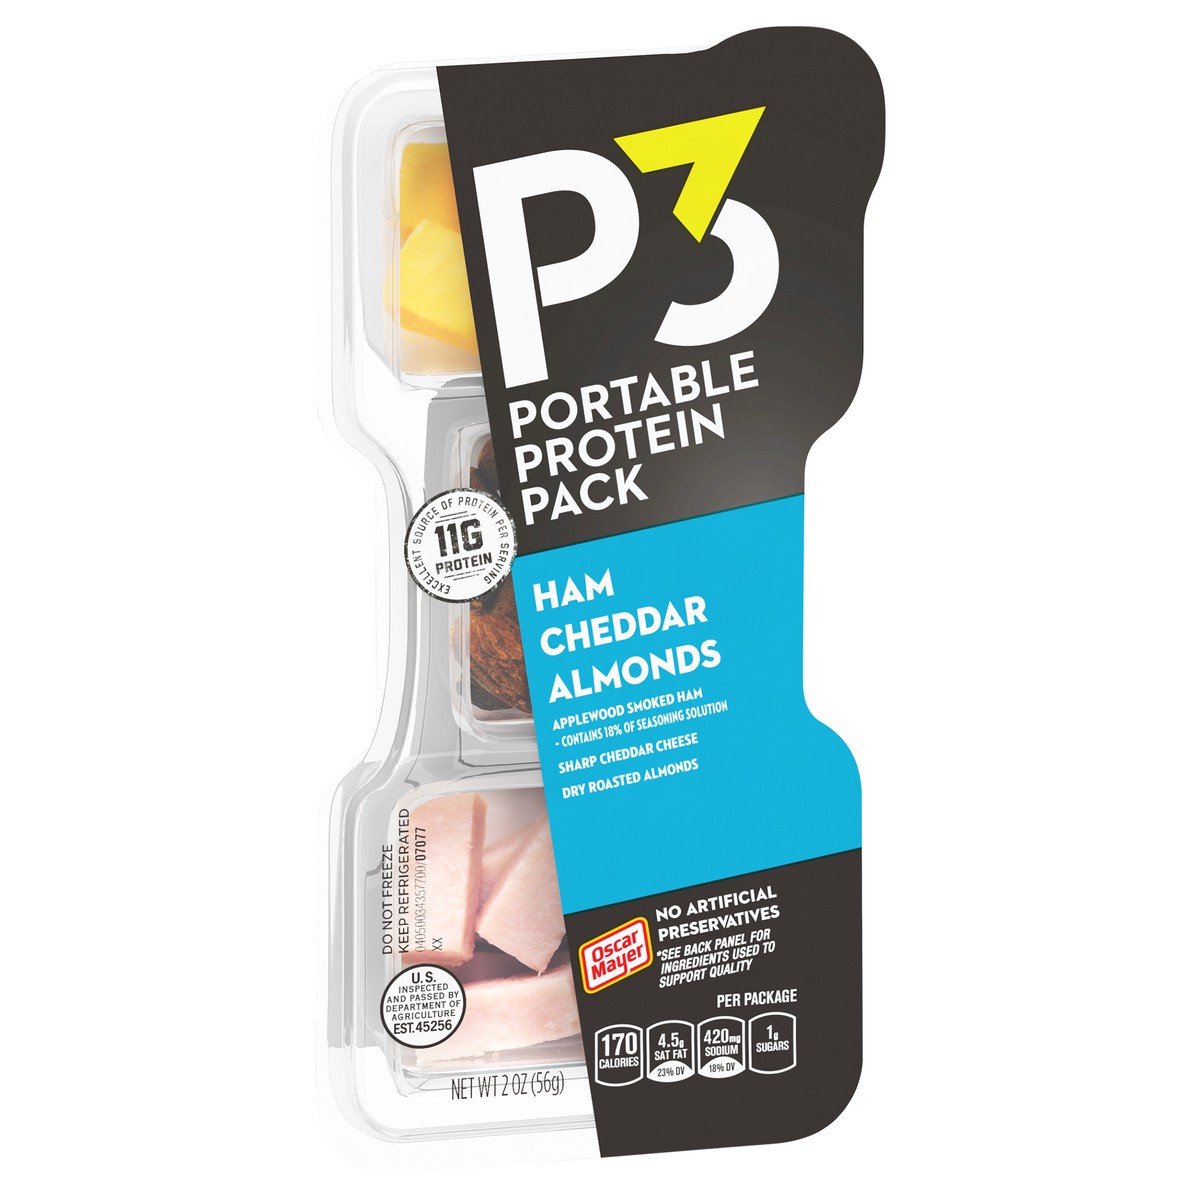 slide 2 of 9, P3 Portable Protein Snack Pack with Ham, Almonds & Cheddar Cheese, 2 oz Tray, 2 oz